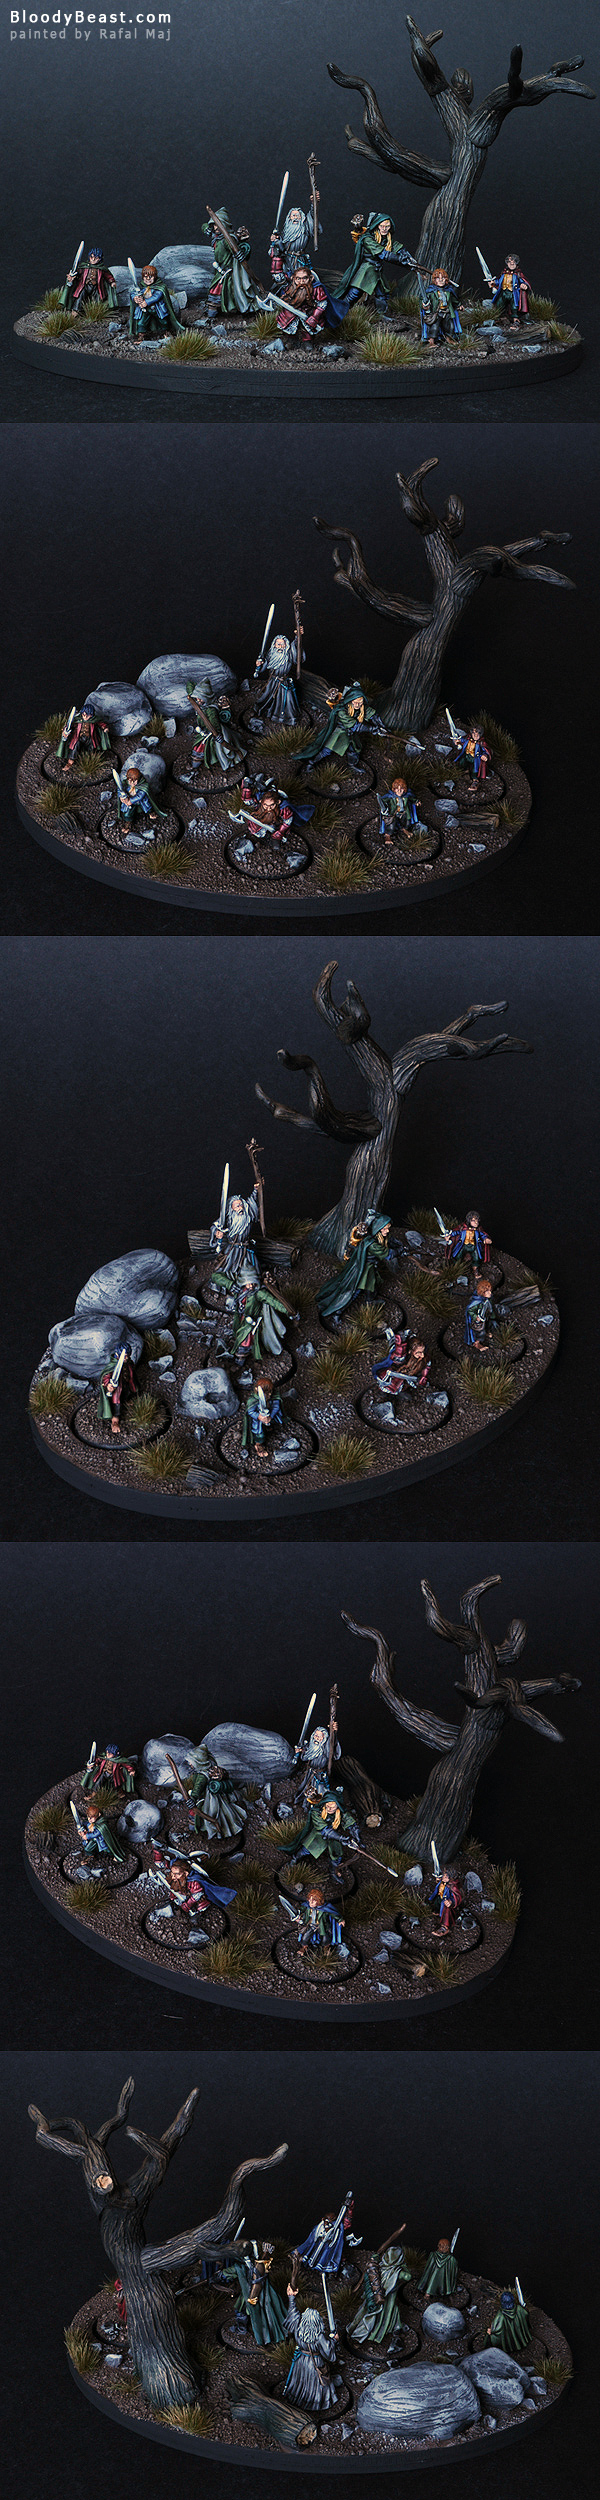 The Fellowship of the Ring painted by Rafal Maj (BloodyBeast.com)